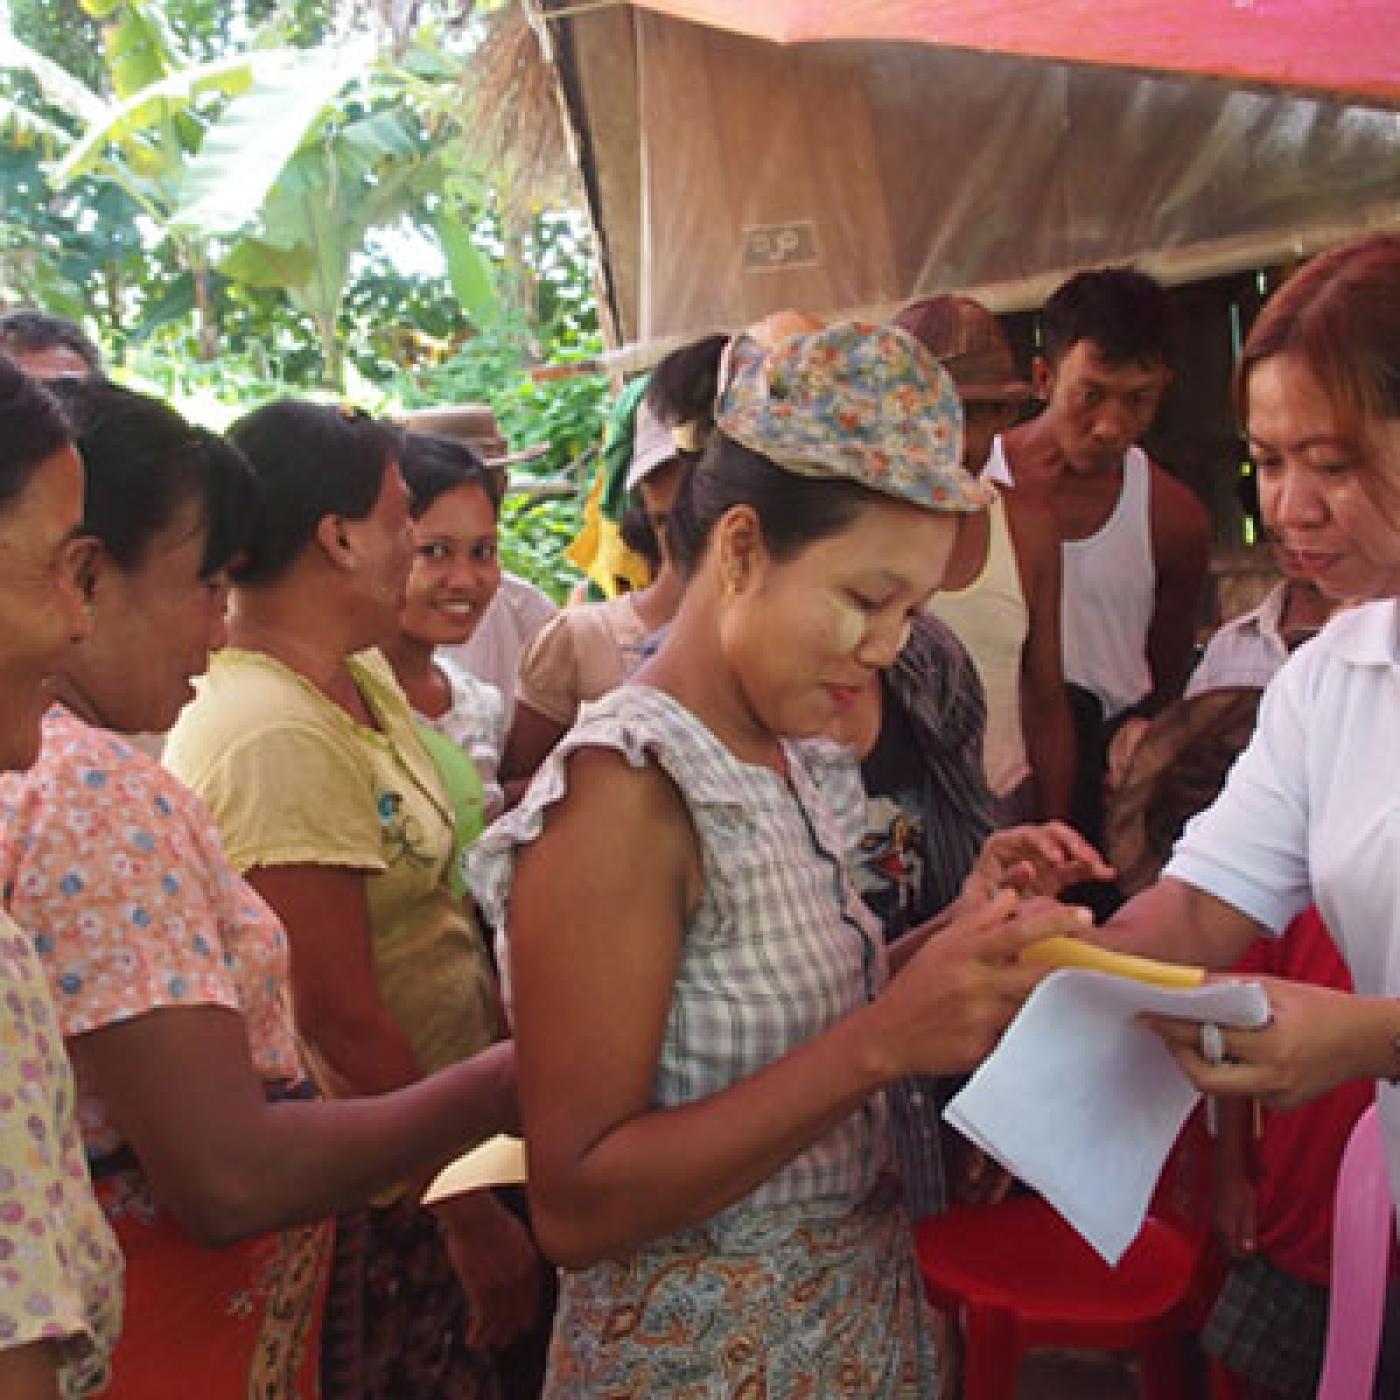 She Leads participant, Sandar Lwin explains to women in Thit Khaung Gyi how to fill in a ballot